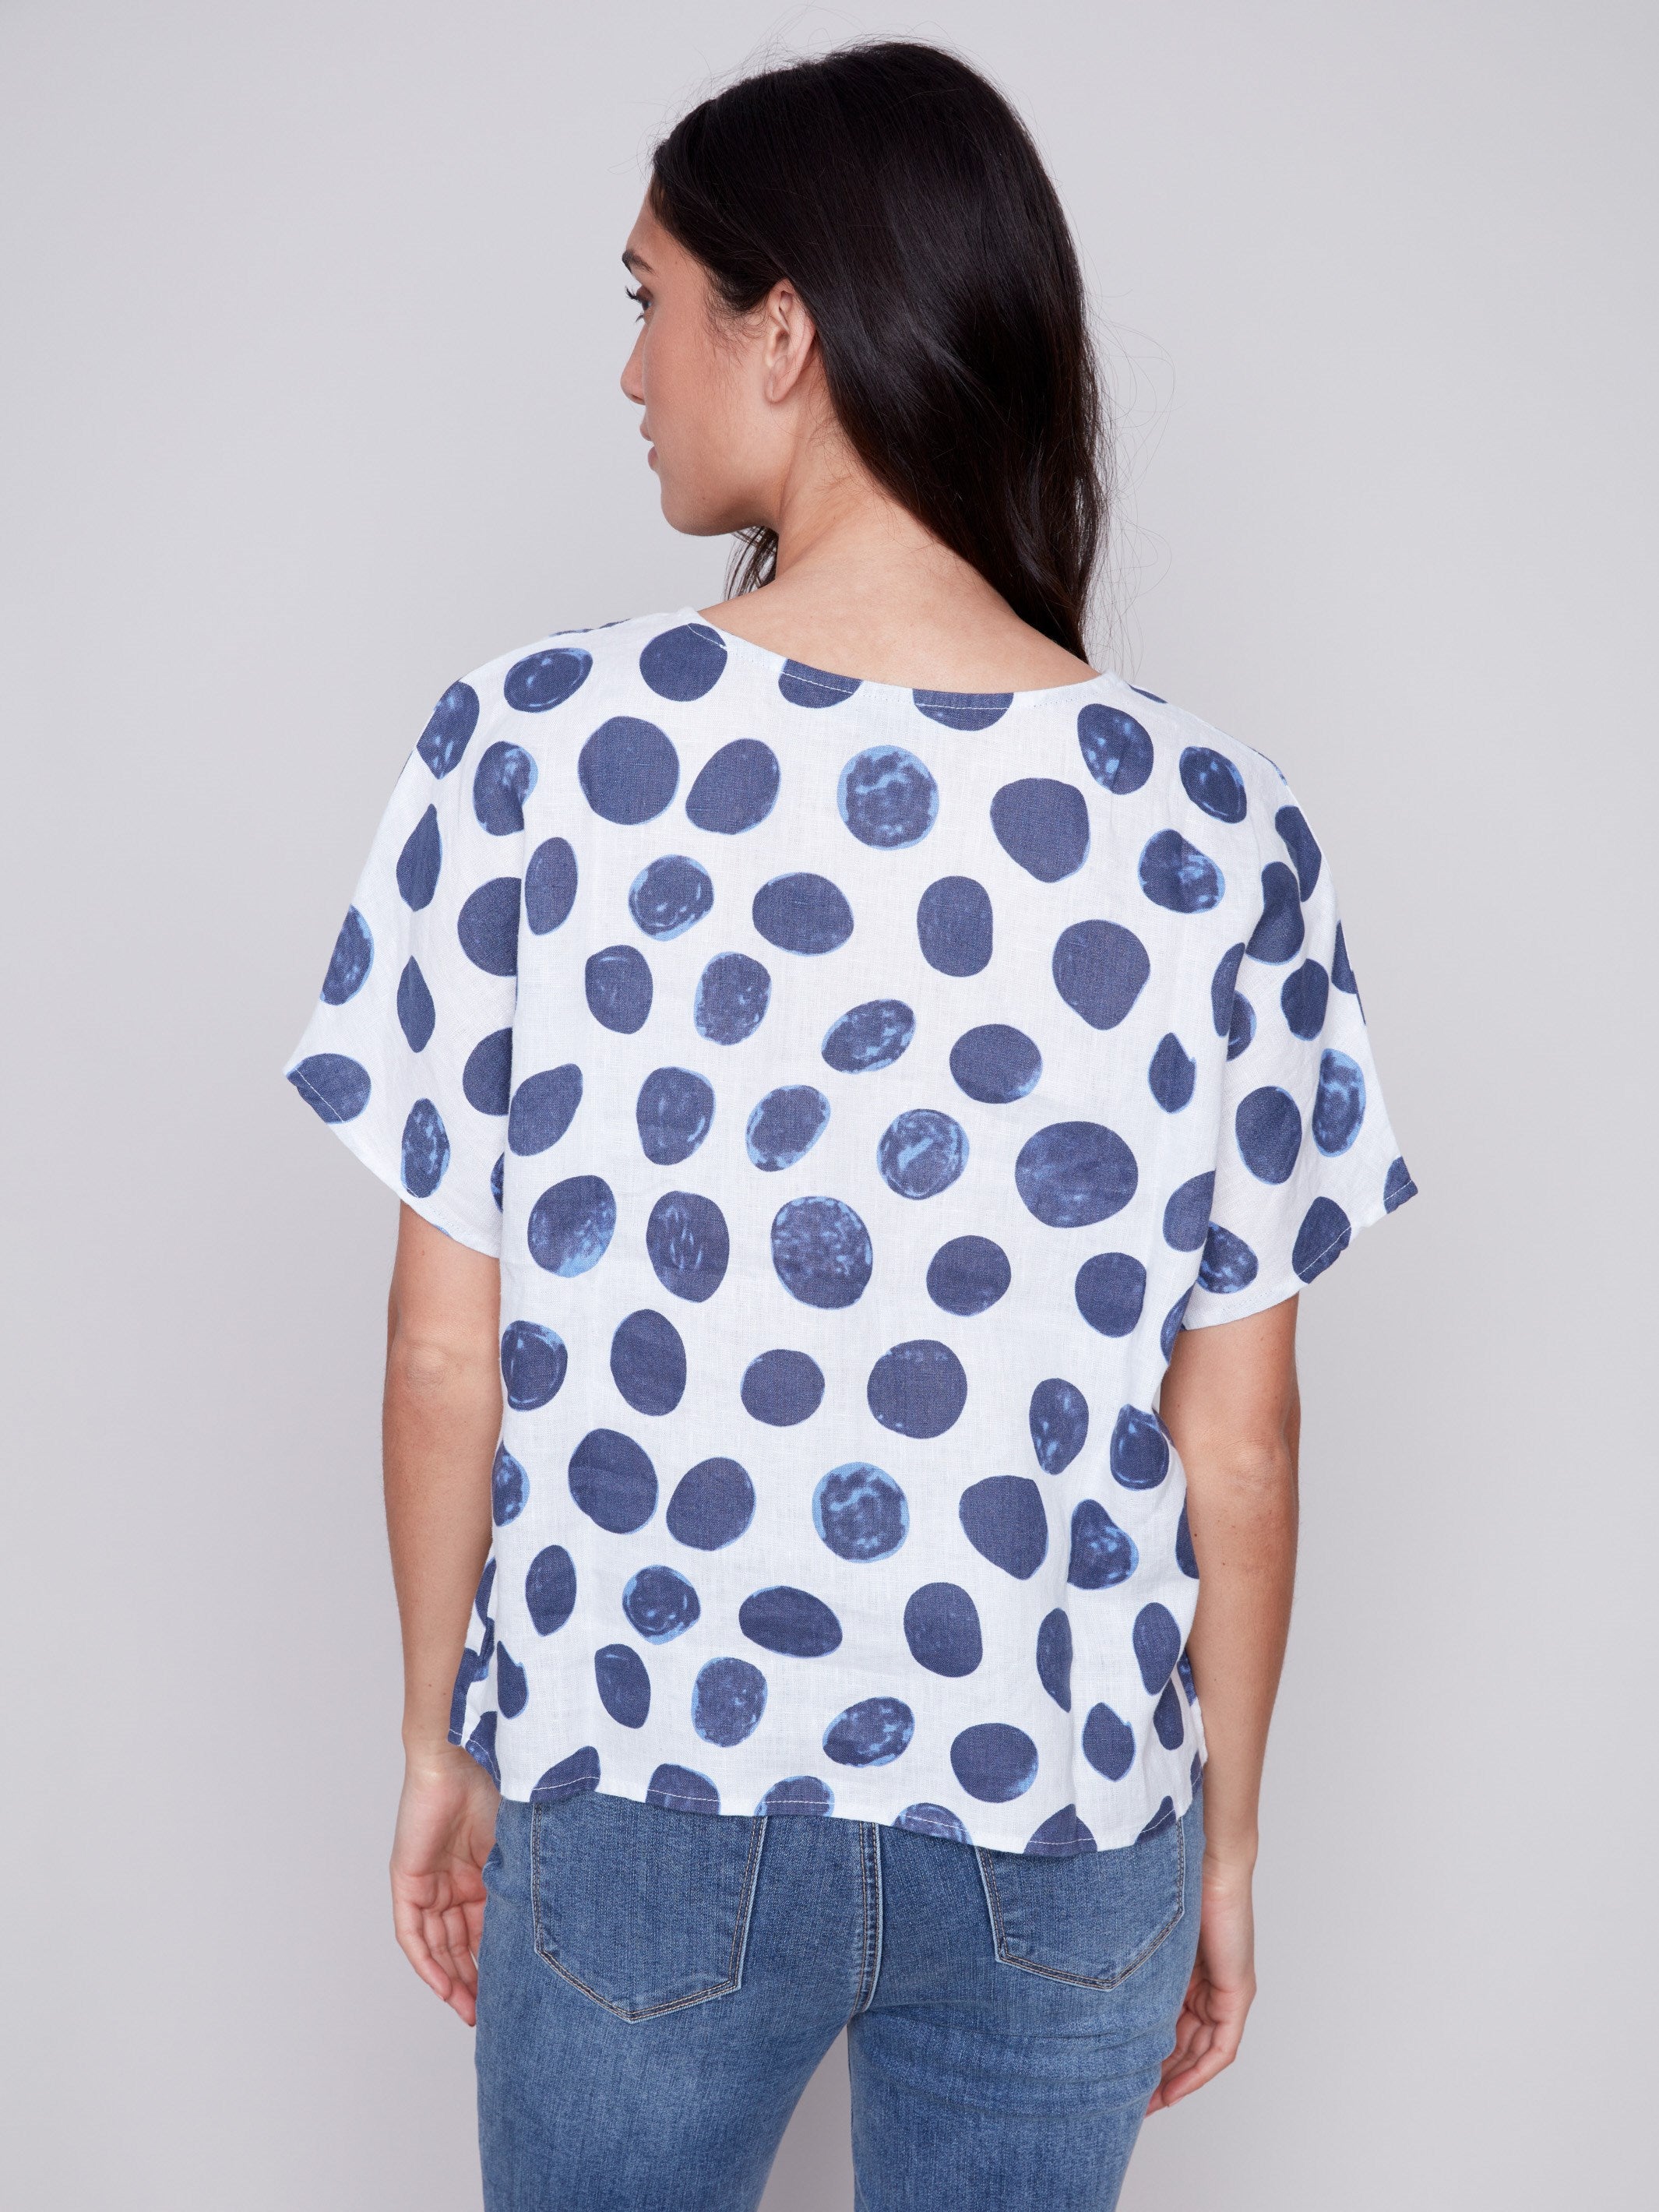 Printed Linen Dolman Top - Dots - Charlie B Collection Canada - Image 2